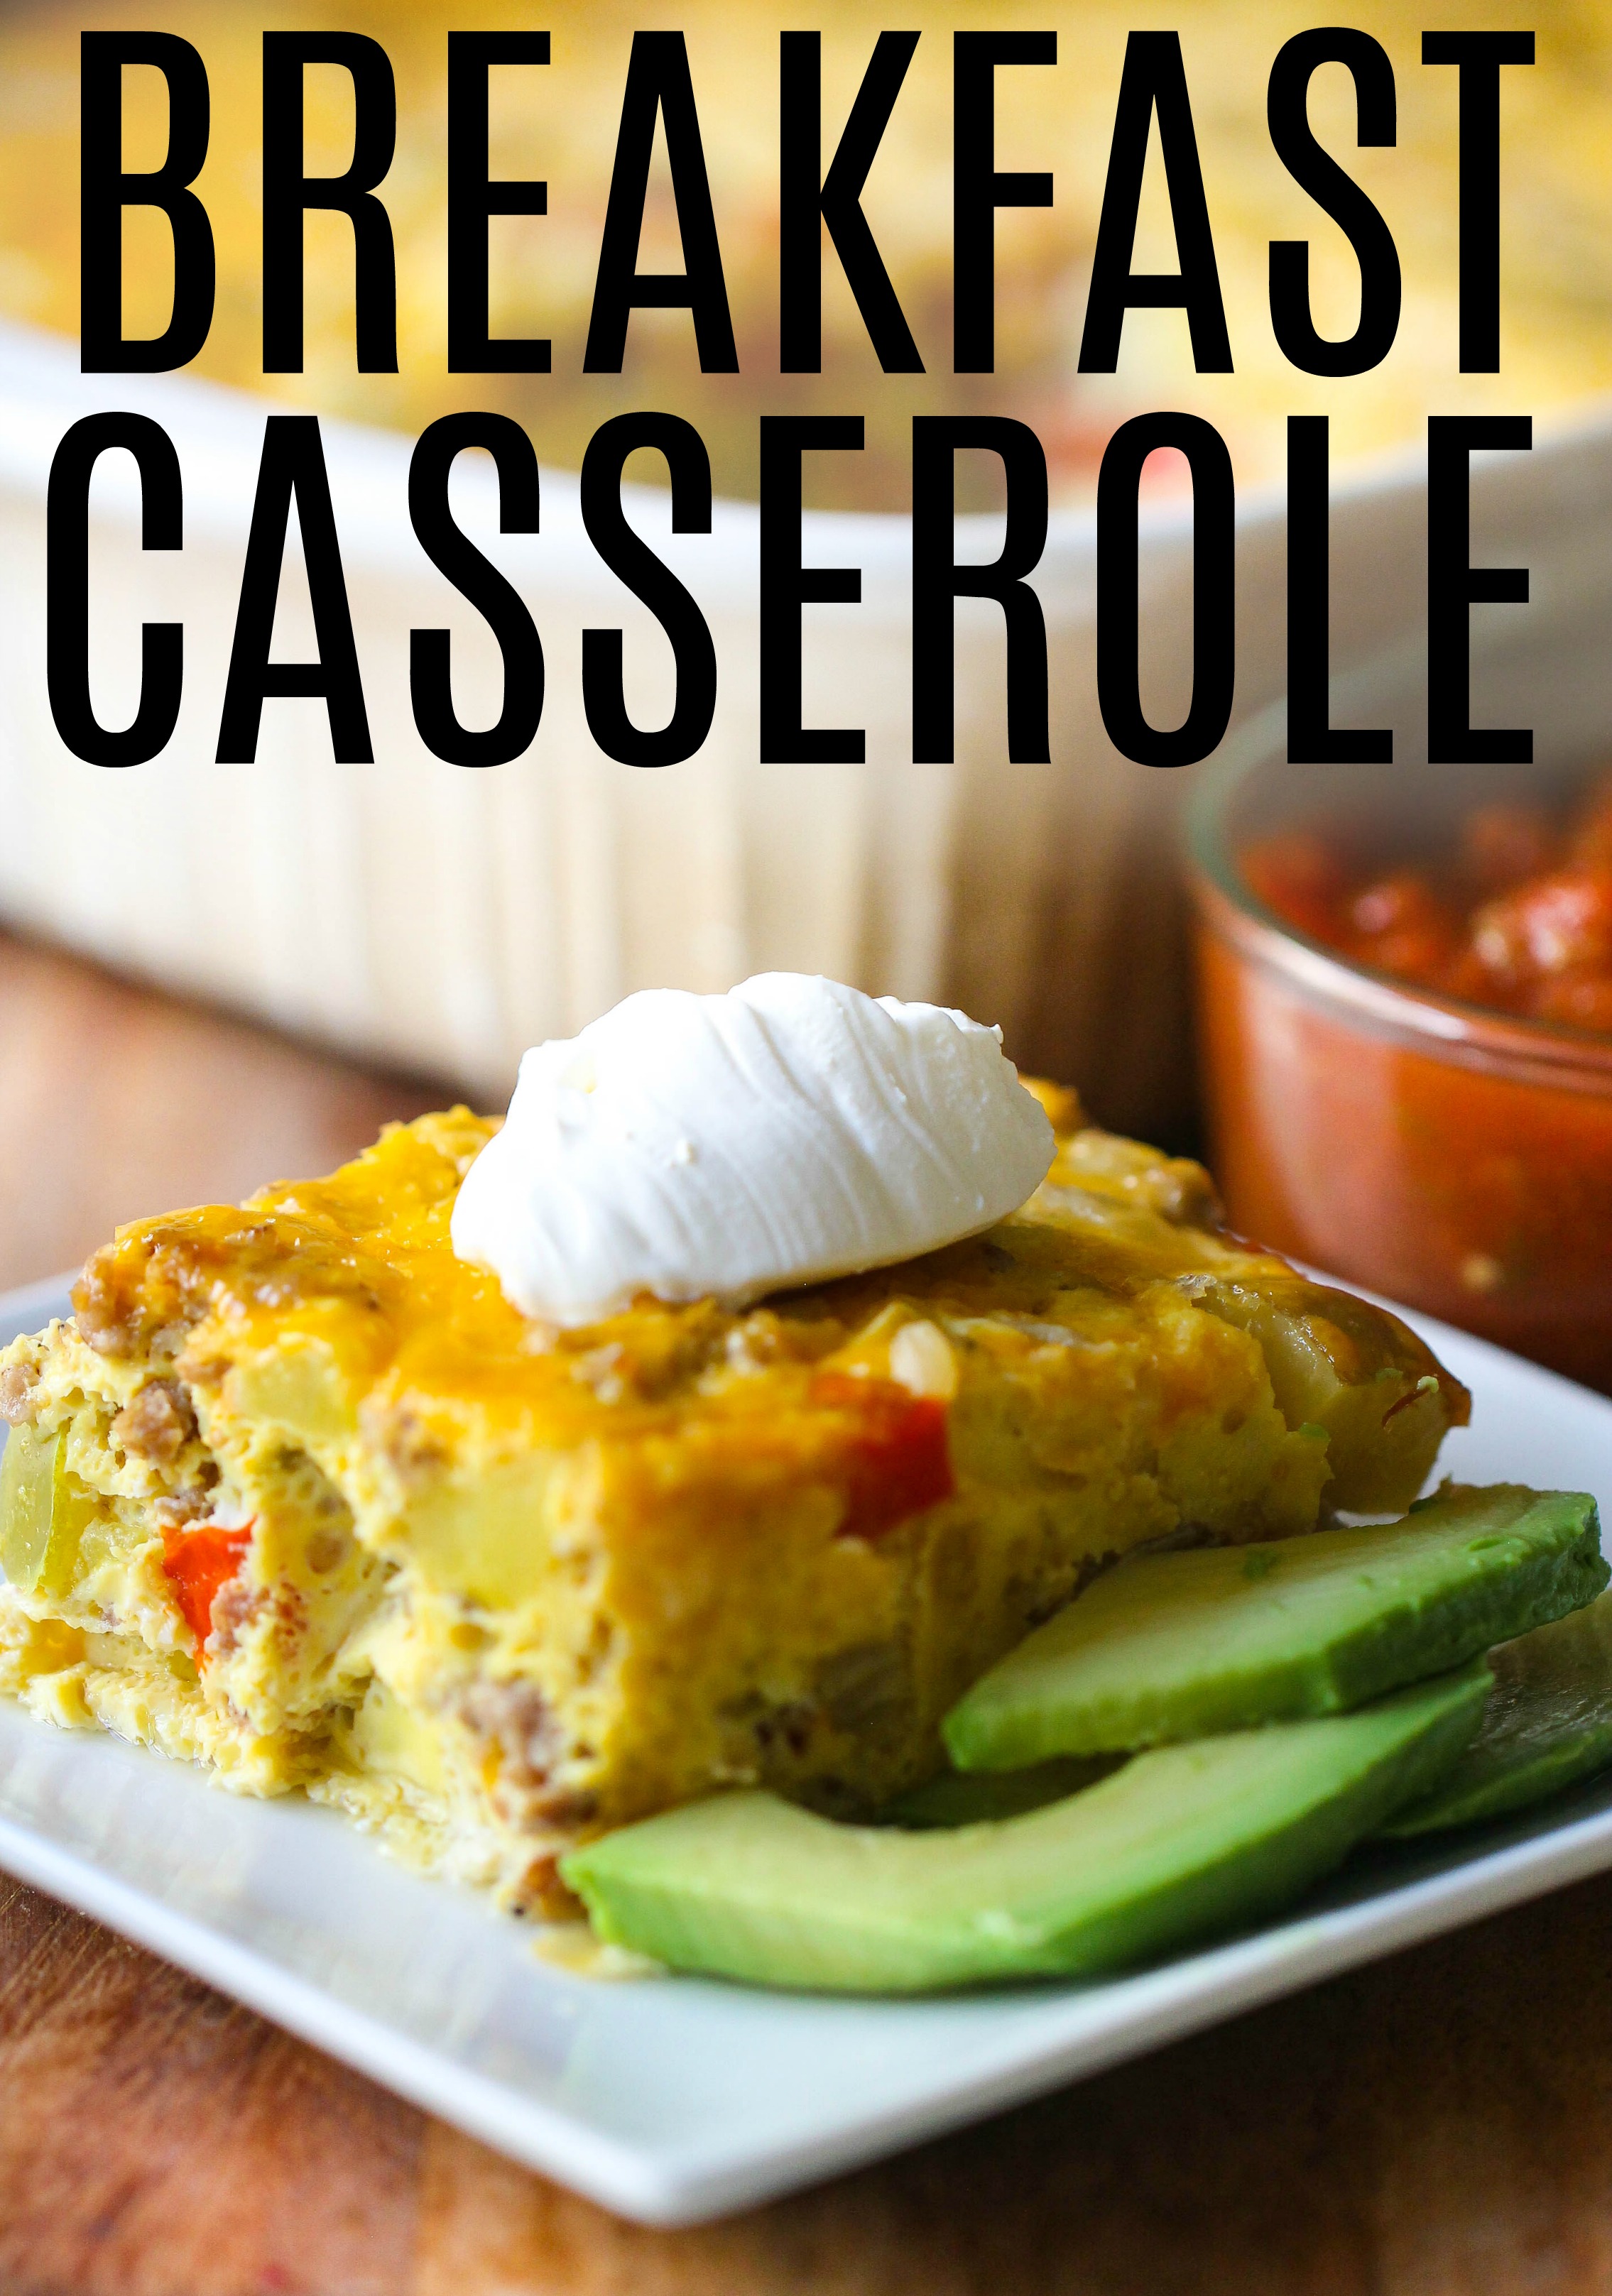 Hashbrown and Egg Breakfast Casserole